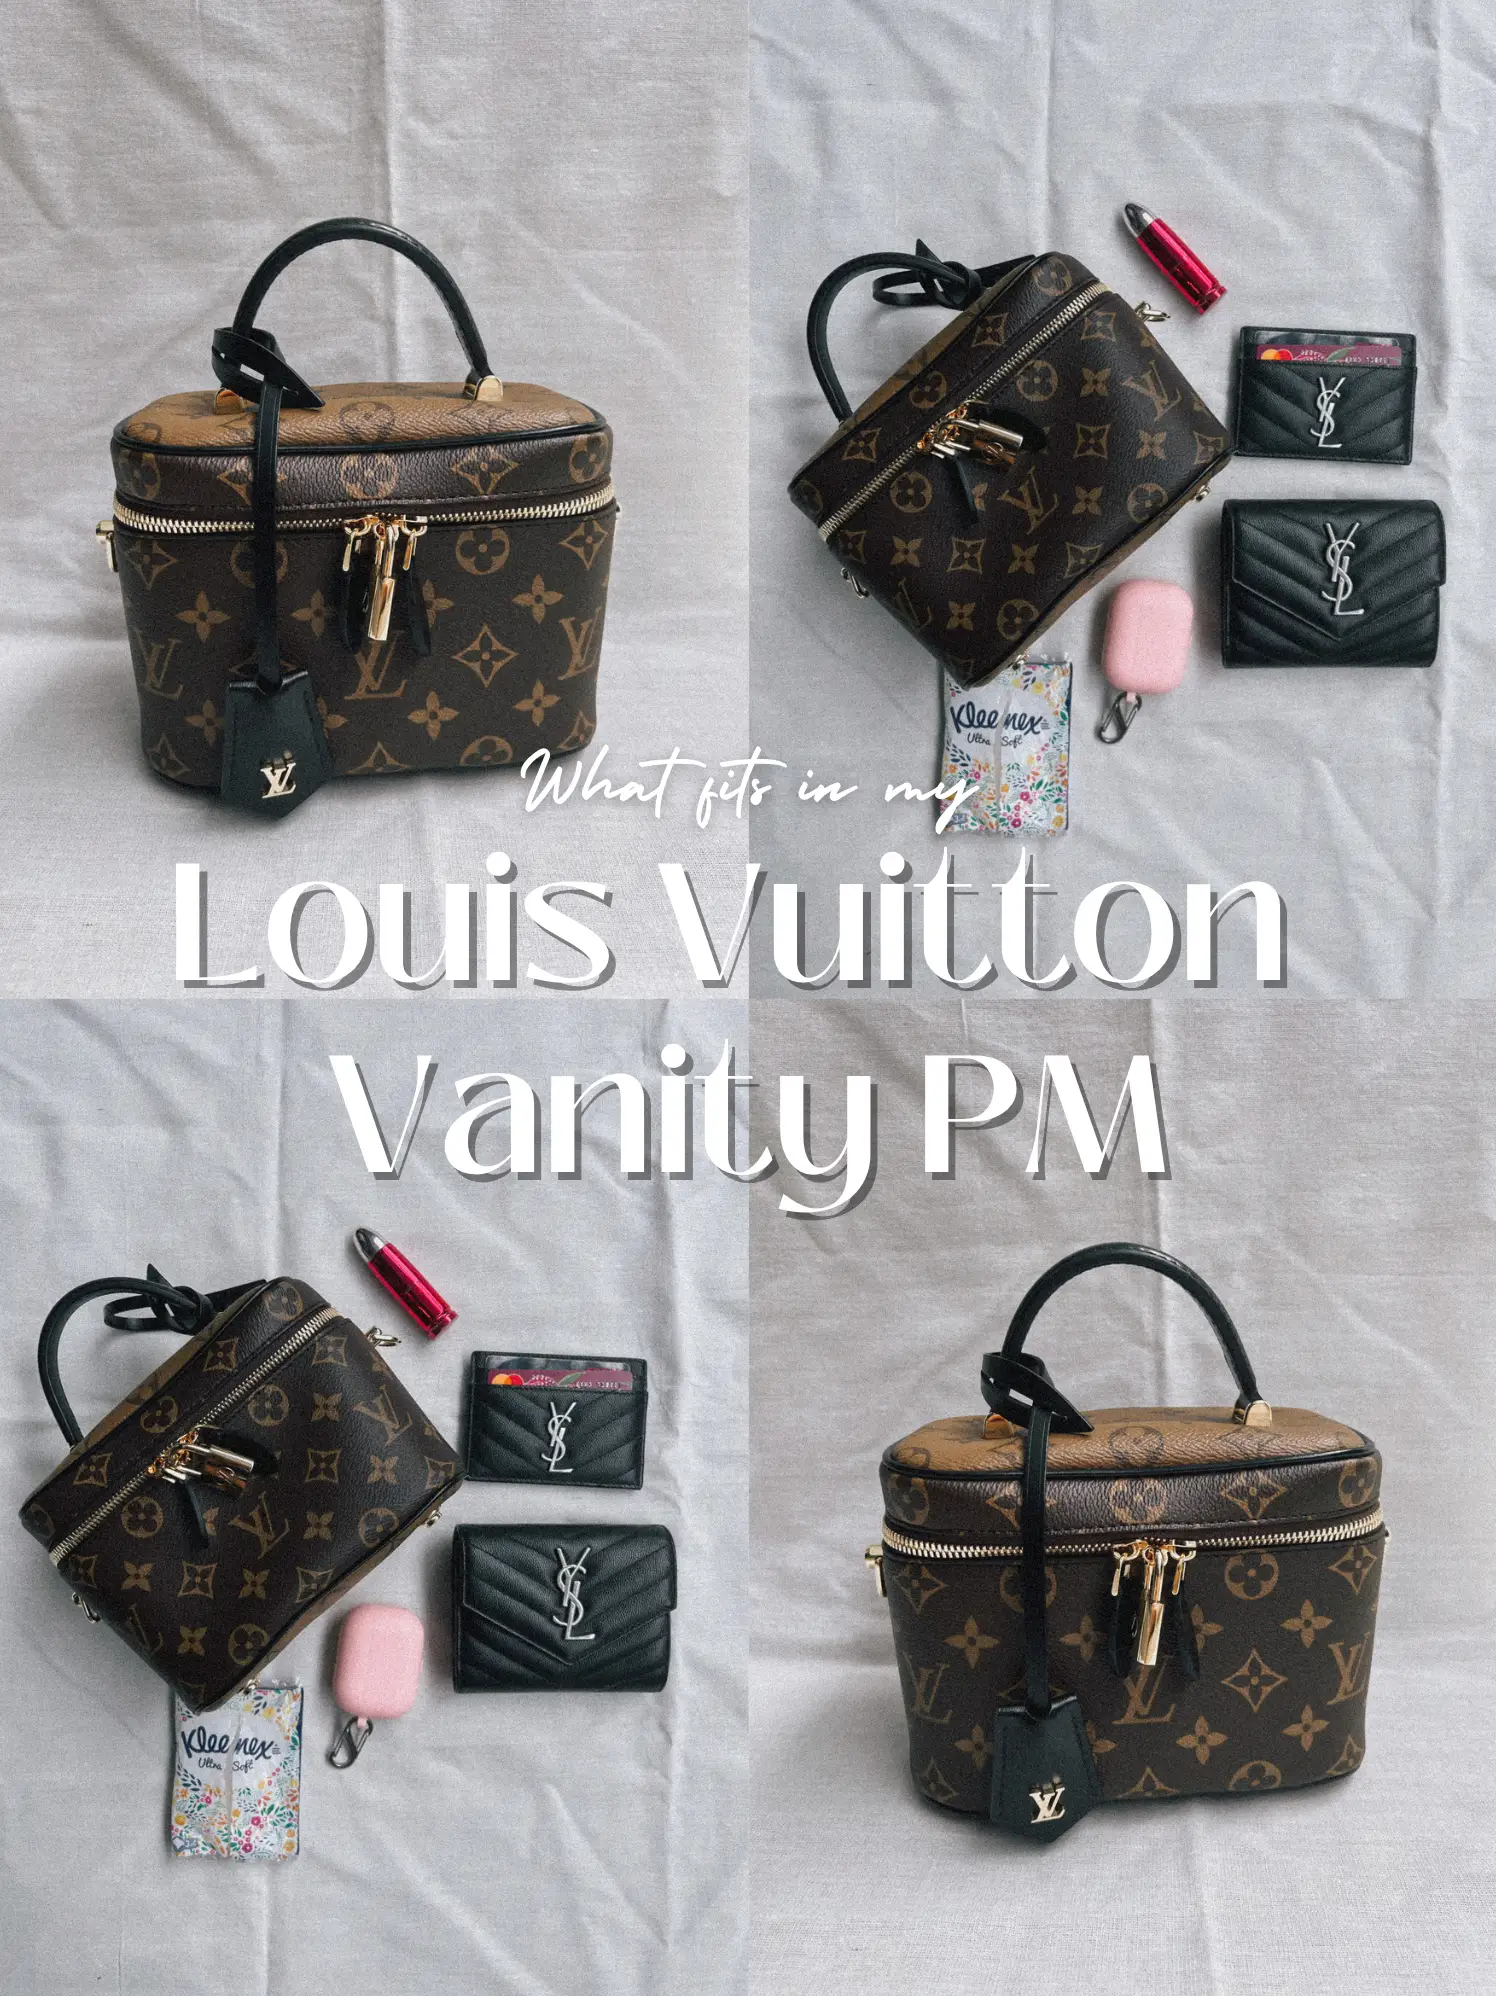 A sign to get Vanity bags! 💕, Gallery posted by 𝓘𝓼𝓪𝓫𝓮𝓵